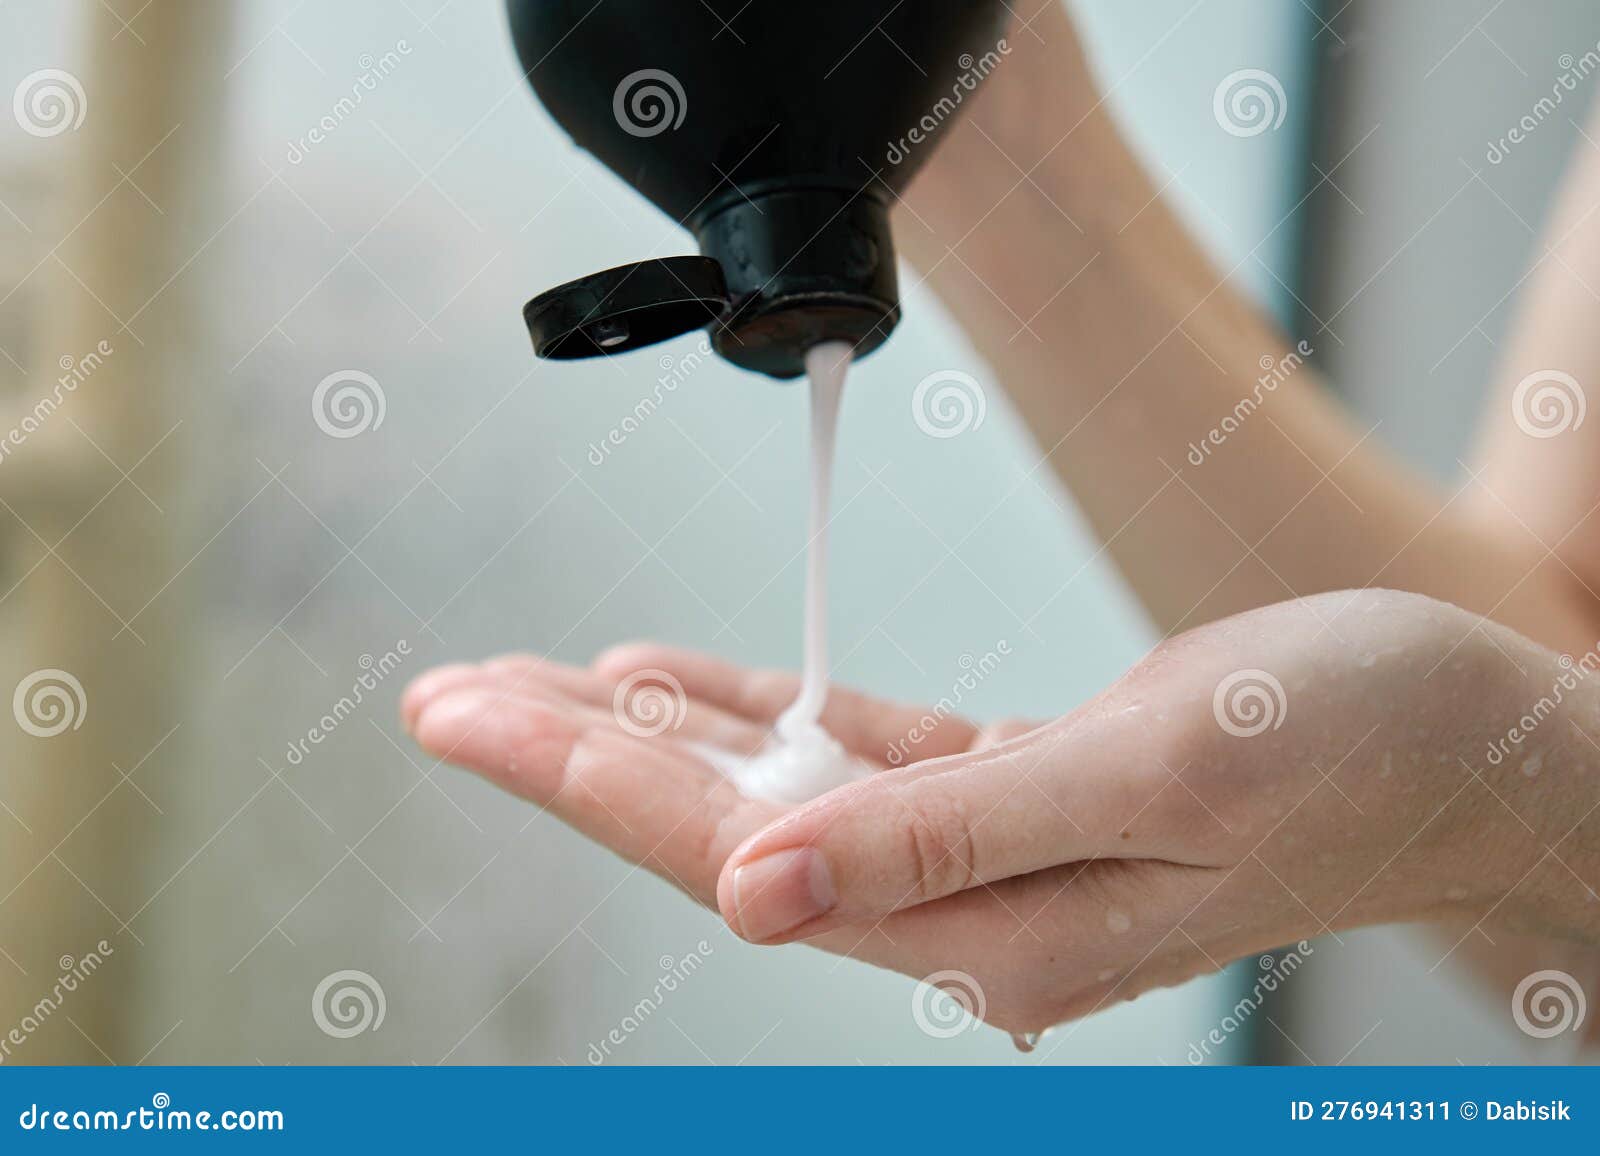 Woman Pouring Shampoo On Hand In Bathroom Stock Image Image Of Drop Bathroom 276941311